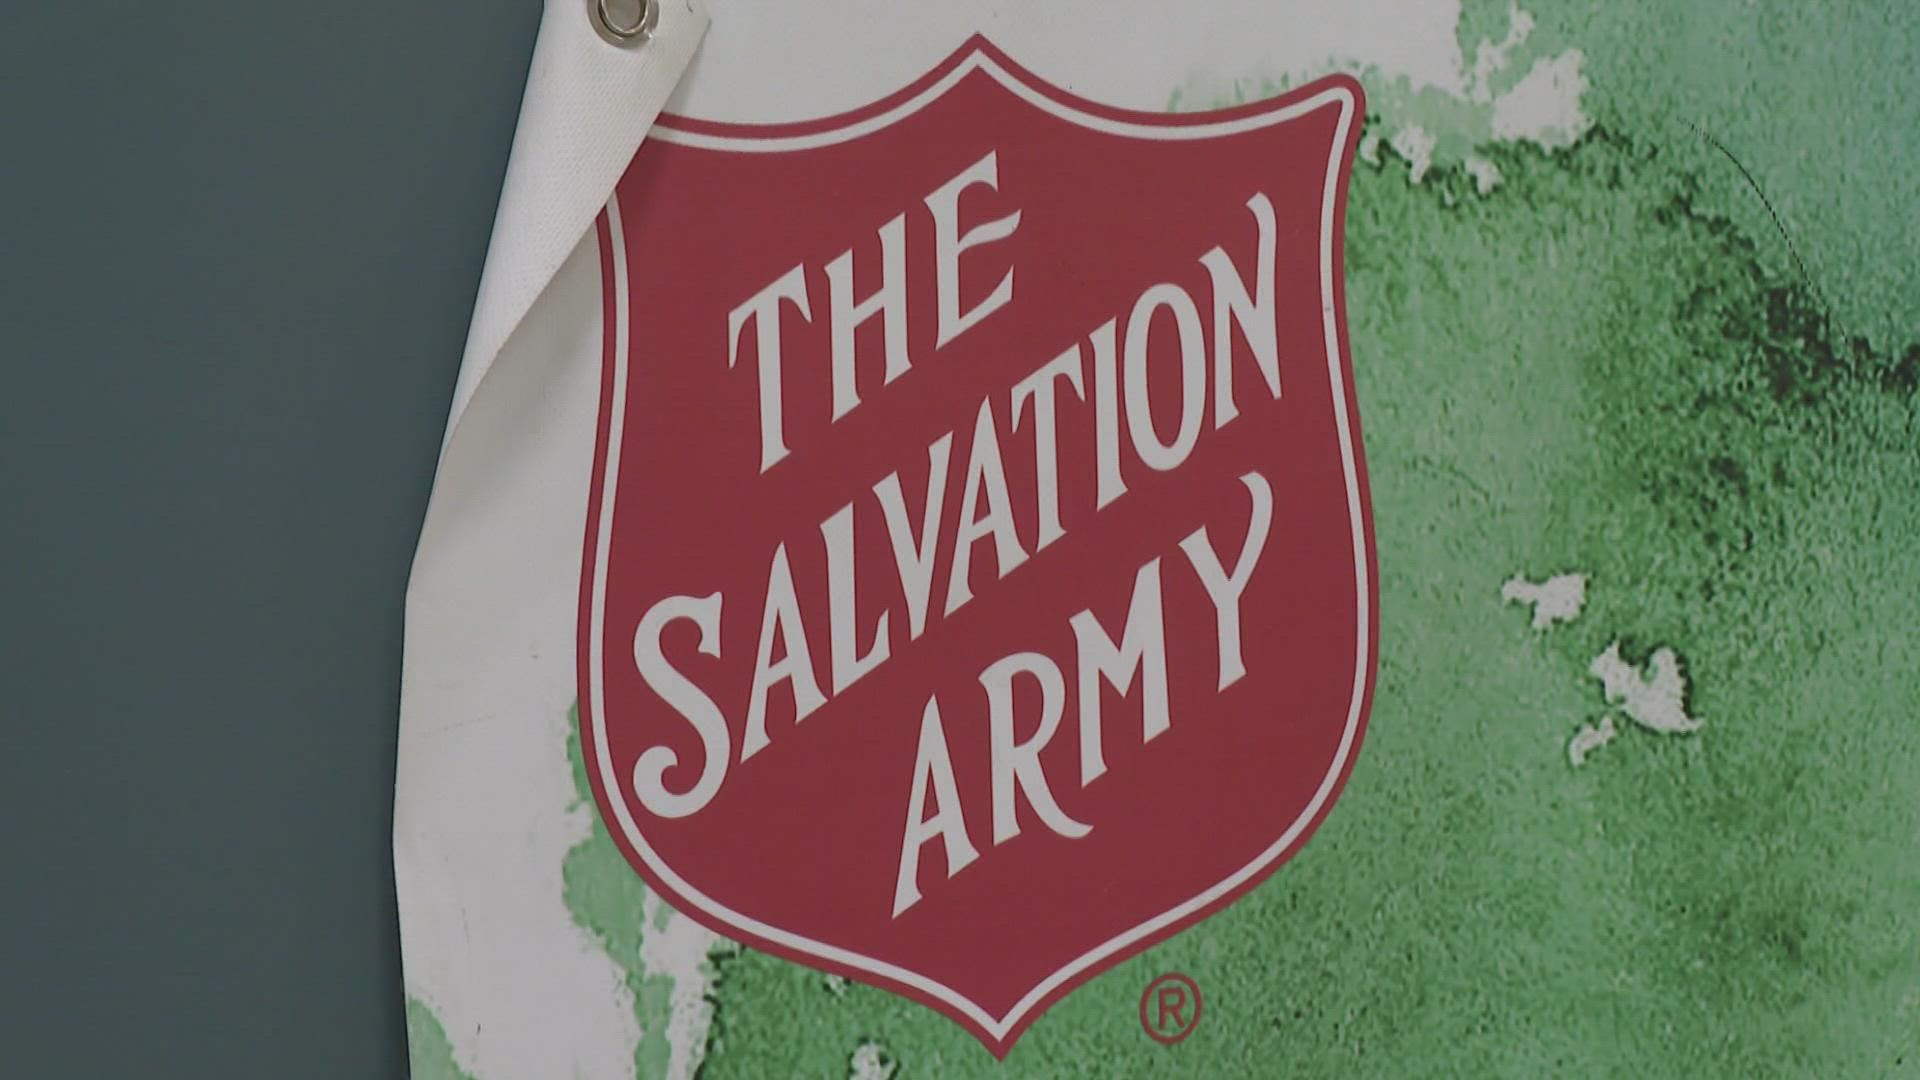 In recent months, car-related crimes have taken off across St. Louis. Now the Salvation Army is on the growing list of victims.